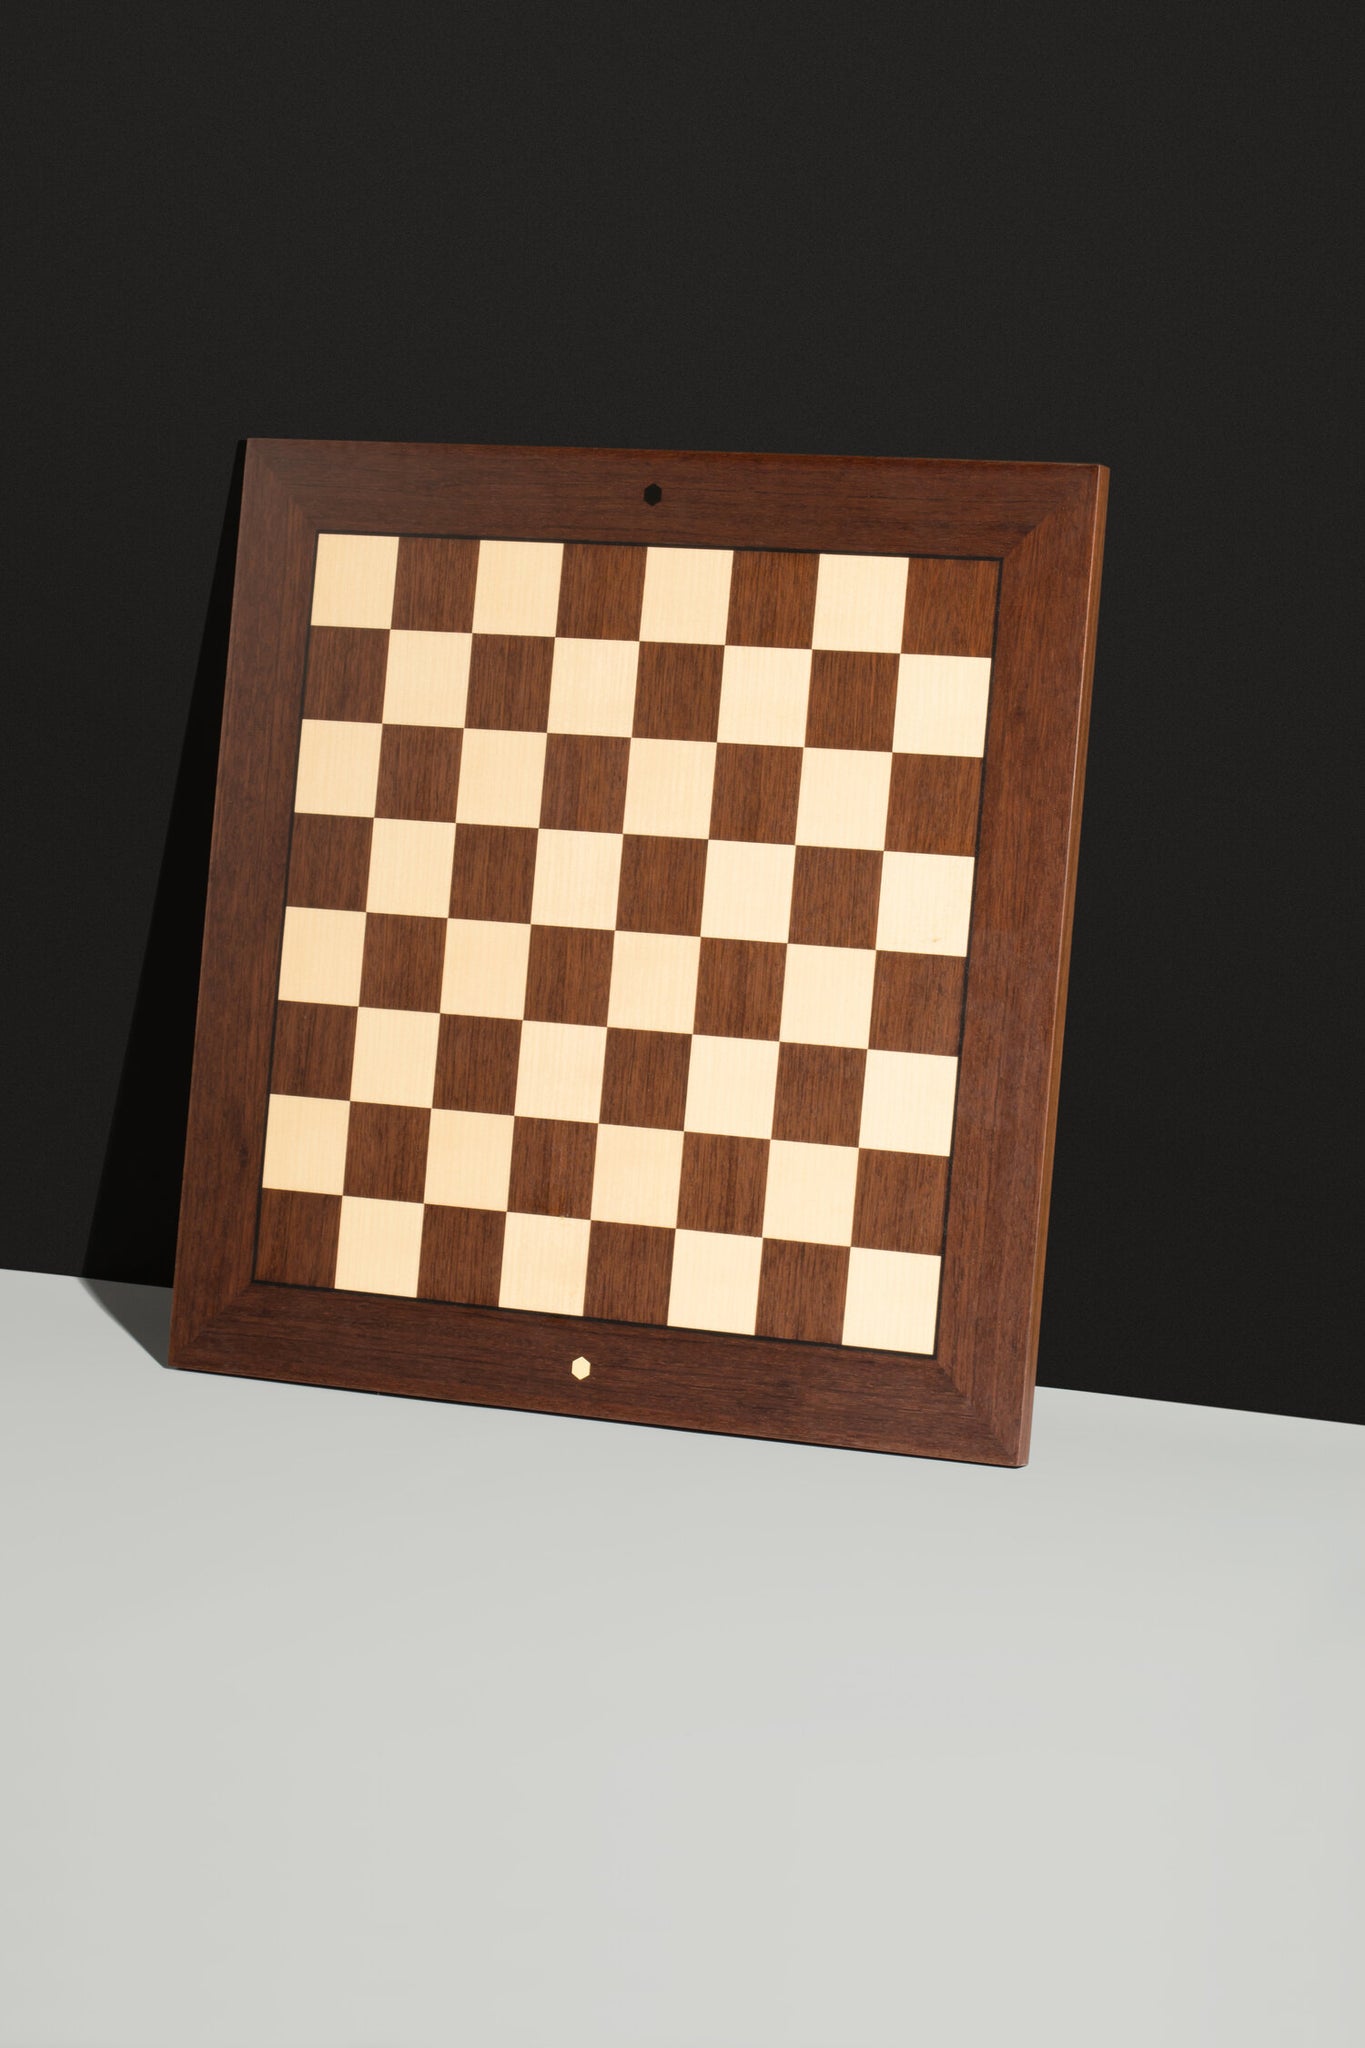 World Chess Championship Set (Rosewood Edition) - buy online with worldwide  shipping – World Chess Shop